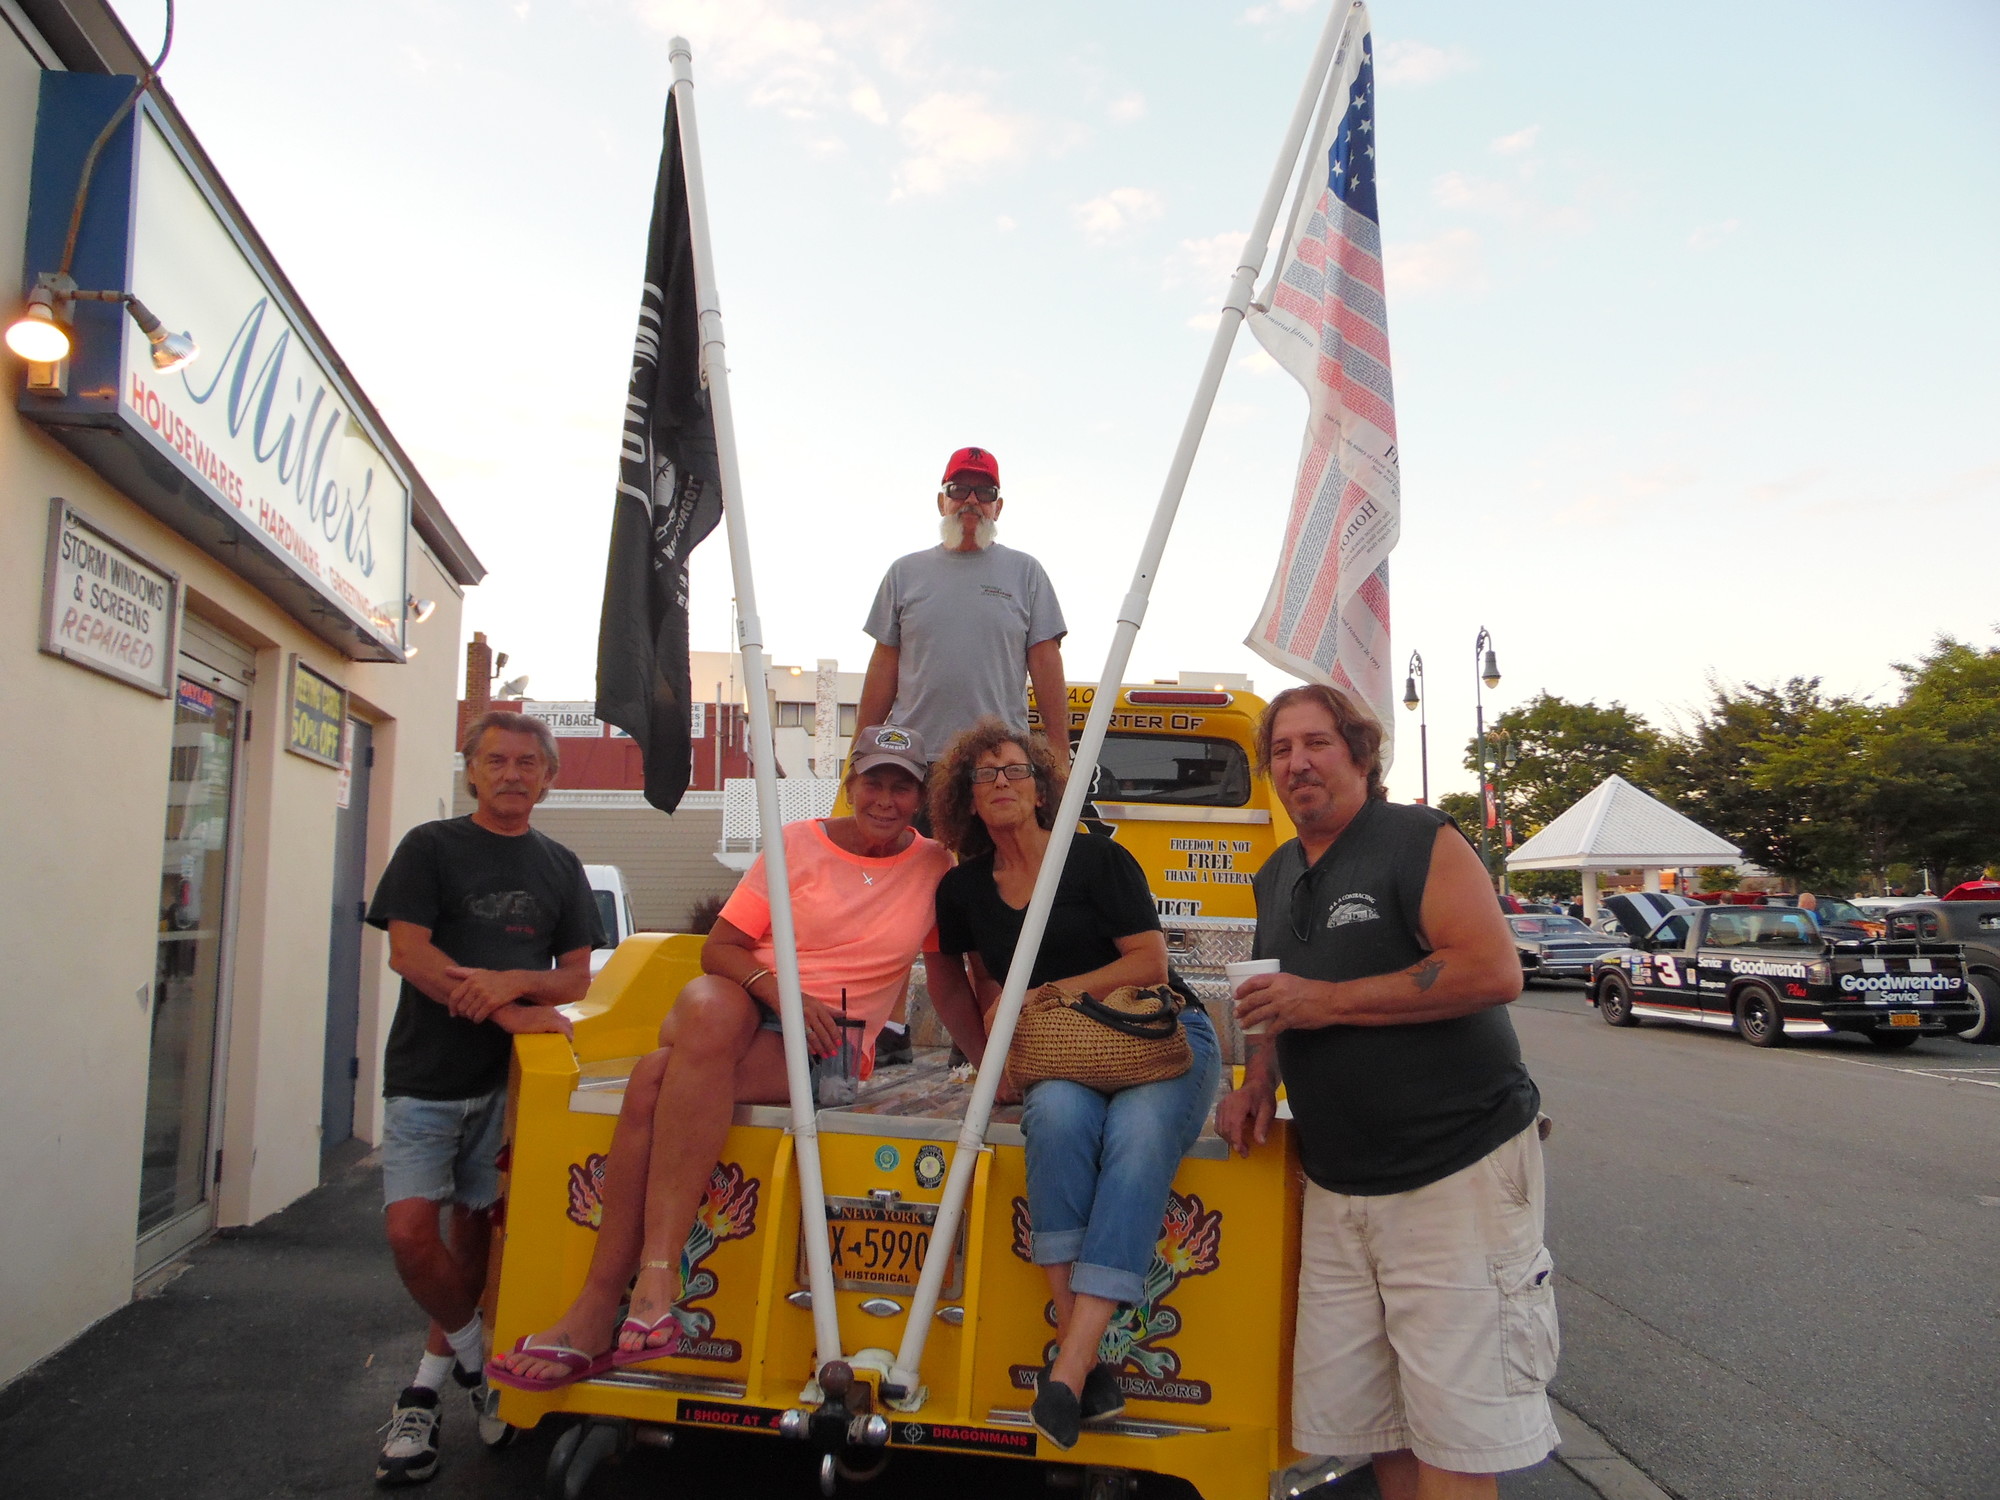 In honor of the Wounded Warriors Project, this 1954 Ford was designed patriotically. Pictured were, from left, David Needham, Kathleen Ruggierio, Bobbi Needham, Michael Ruggierio and, standing, “Theo Kojak.”